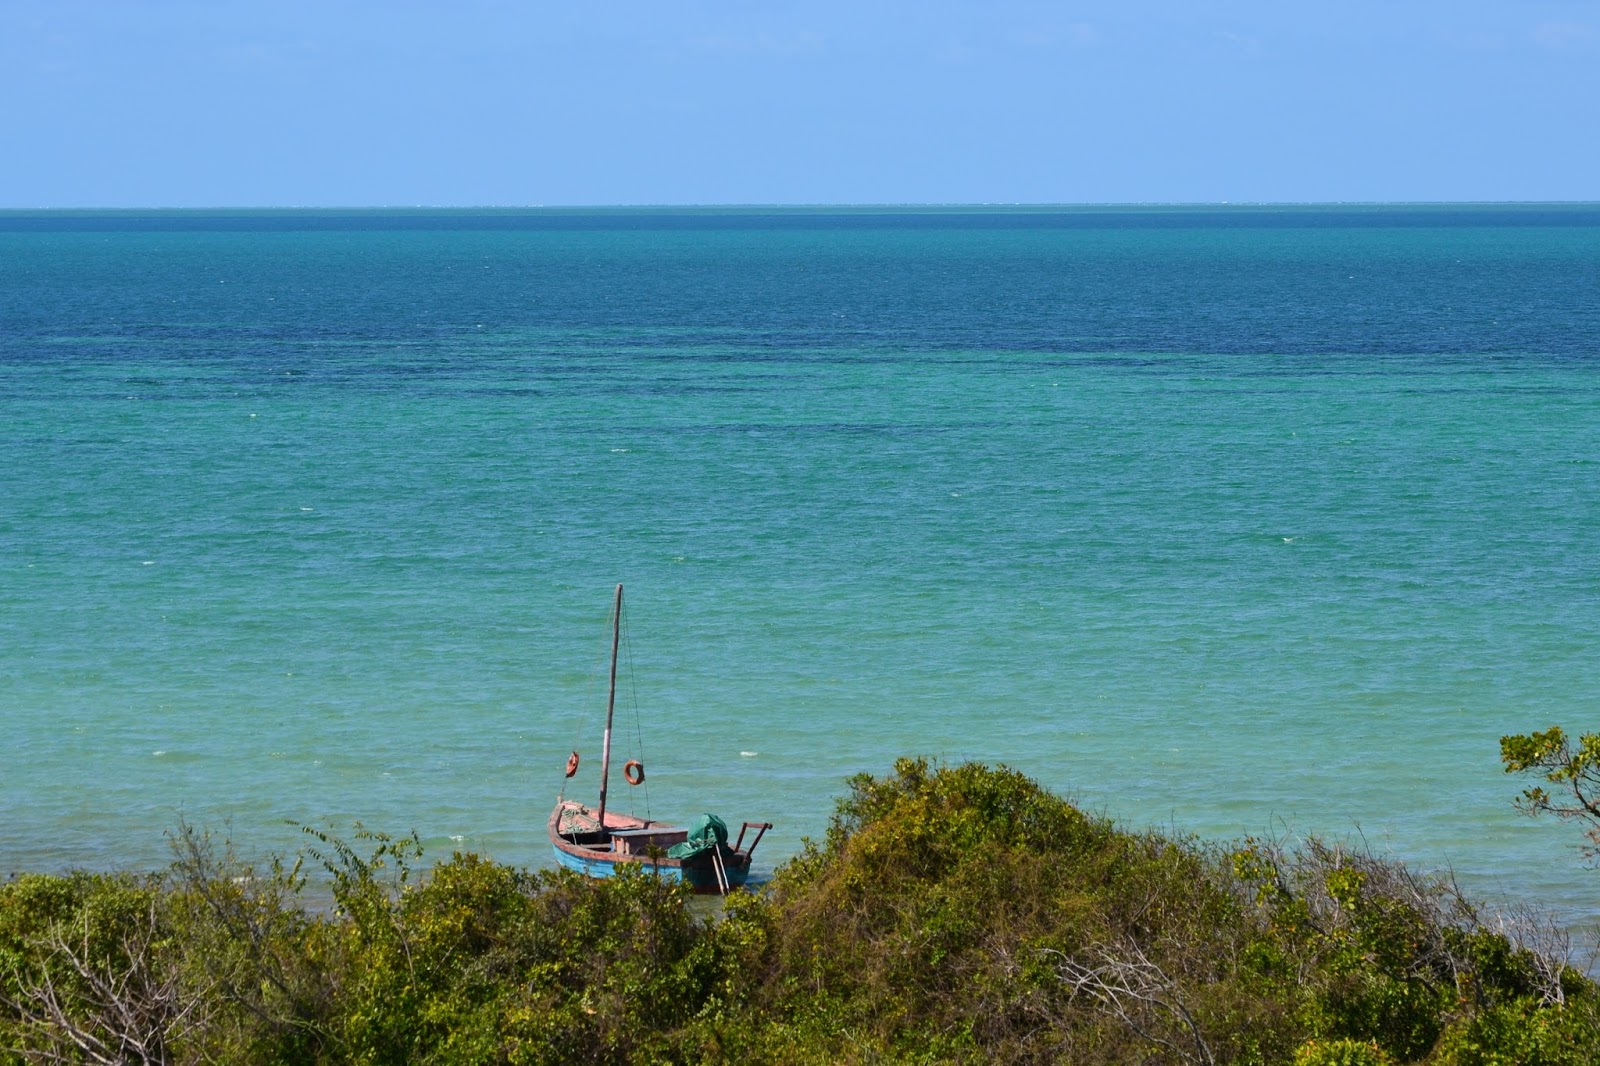 A solo travelers guide to Mozambique- A guide on things to do, what to eat and things to know